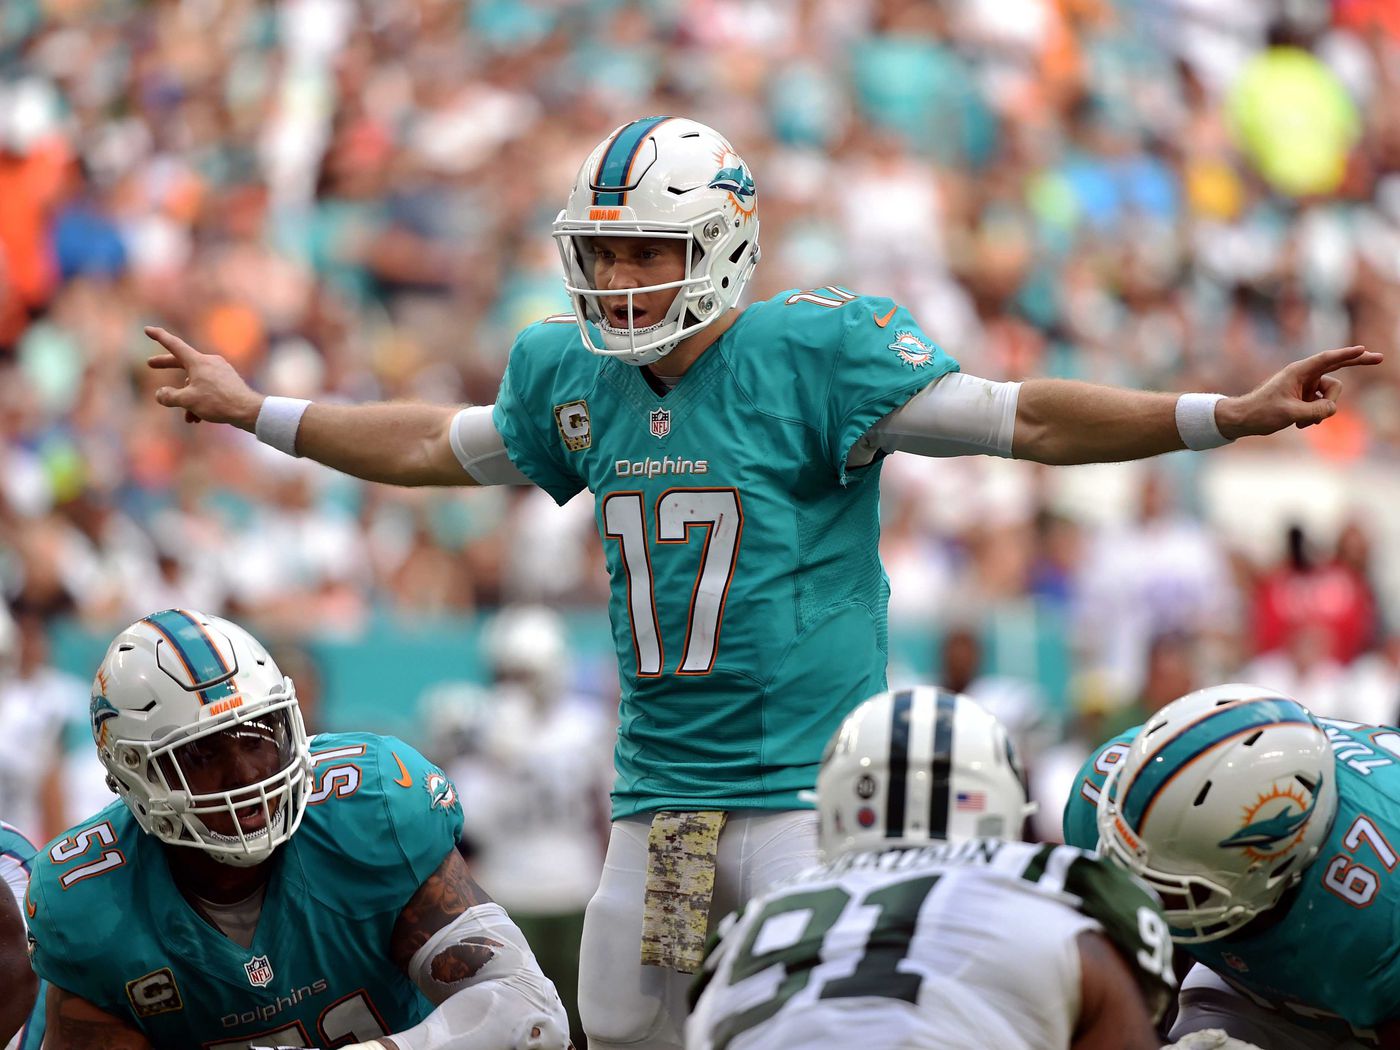 You can buy a Ryan Tannehill ELITE jersey for $130!!!! - The Phinsider